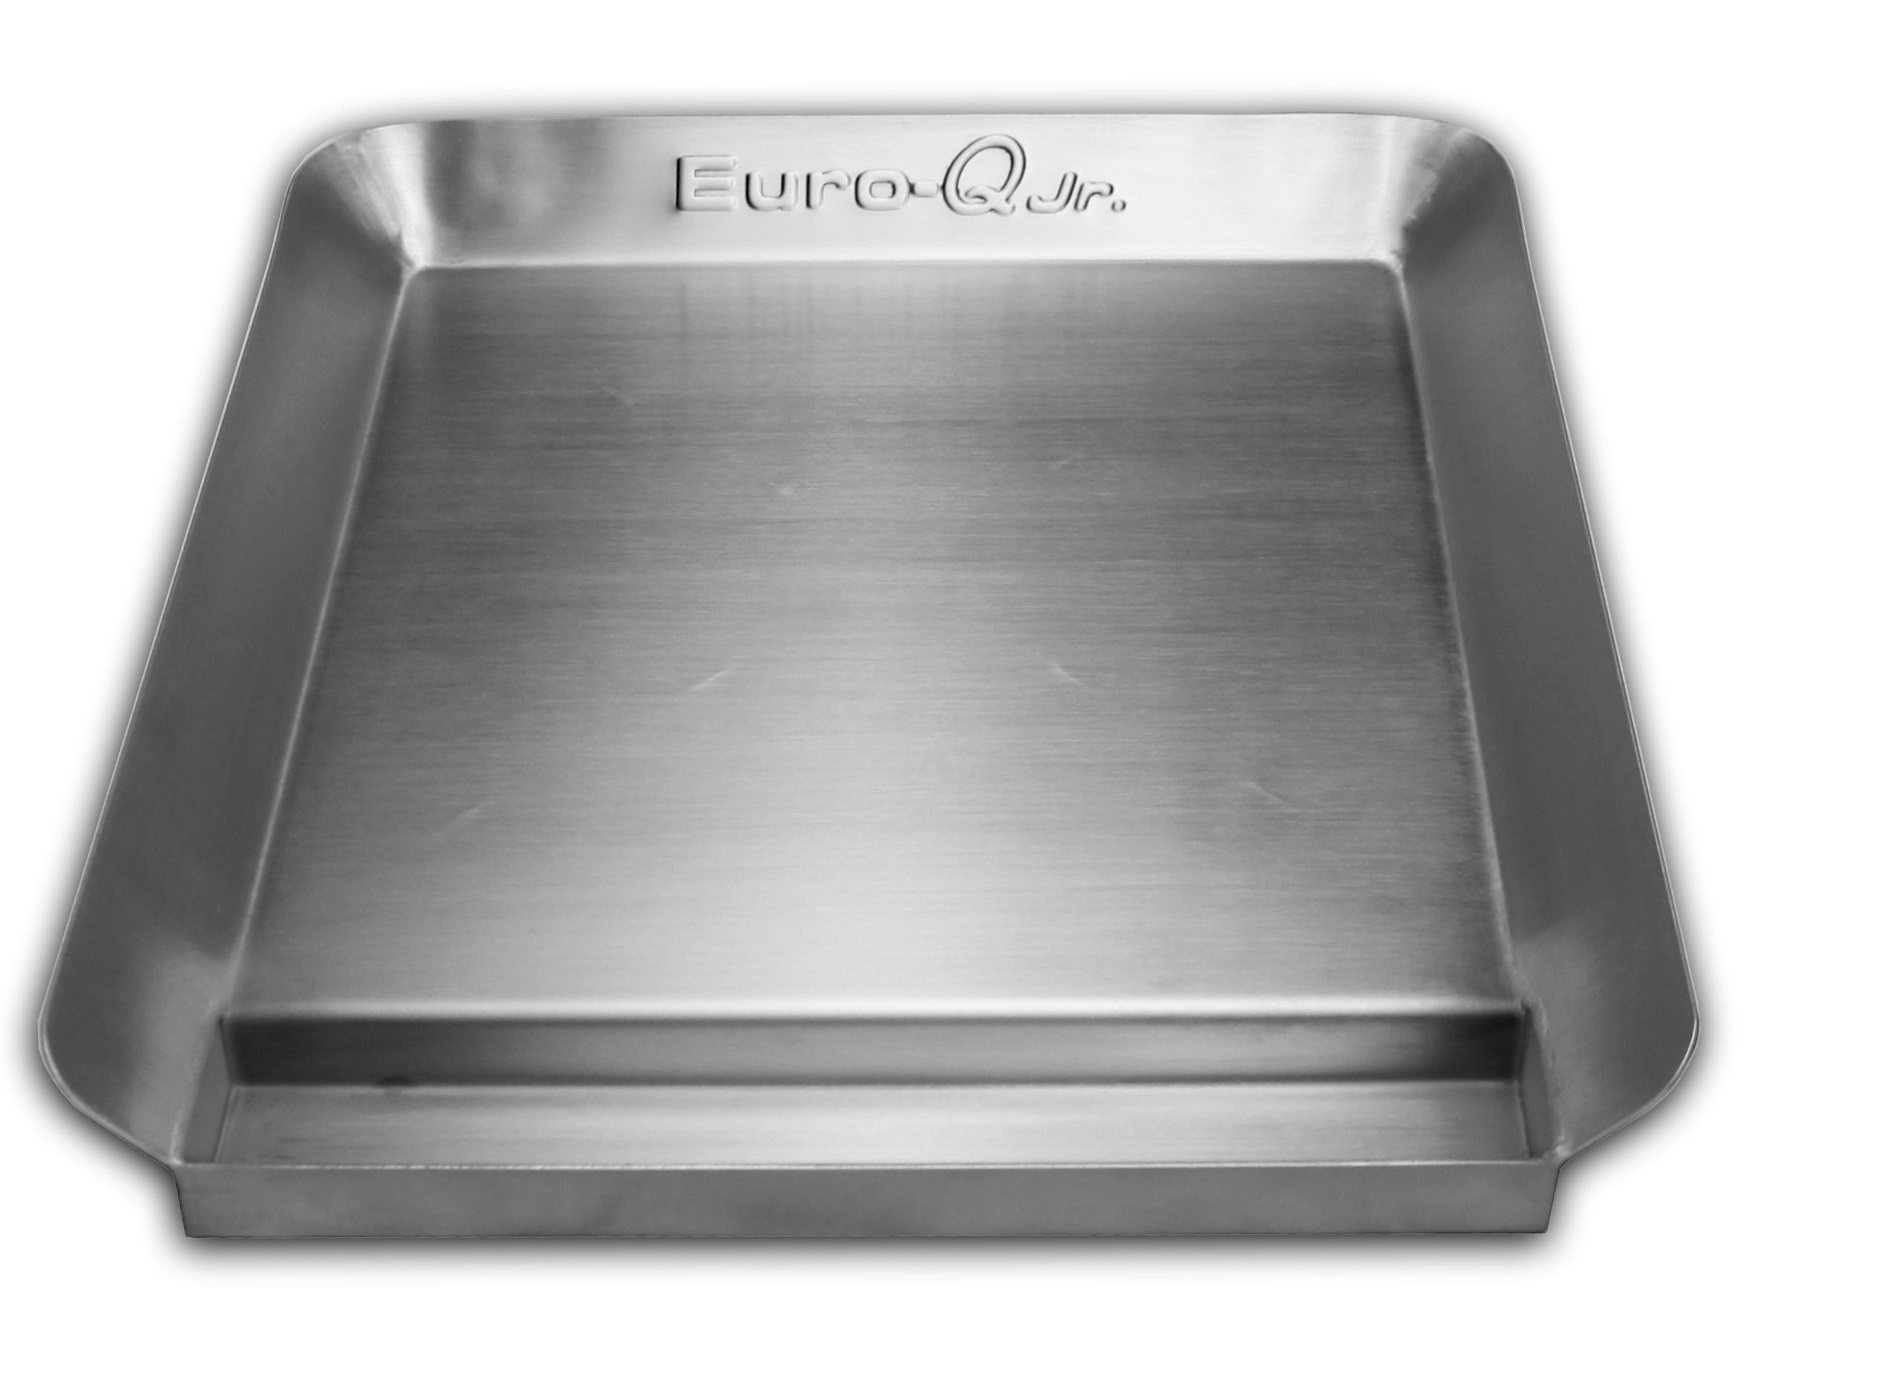 Little Griddle Essential Series Euro-Q Jr.- Half-Size, Low Profile Stainless Steel Griddle